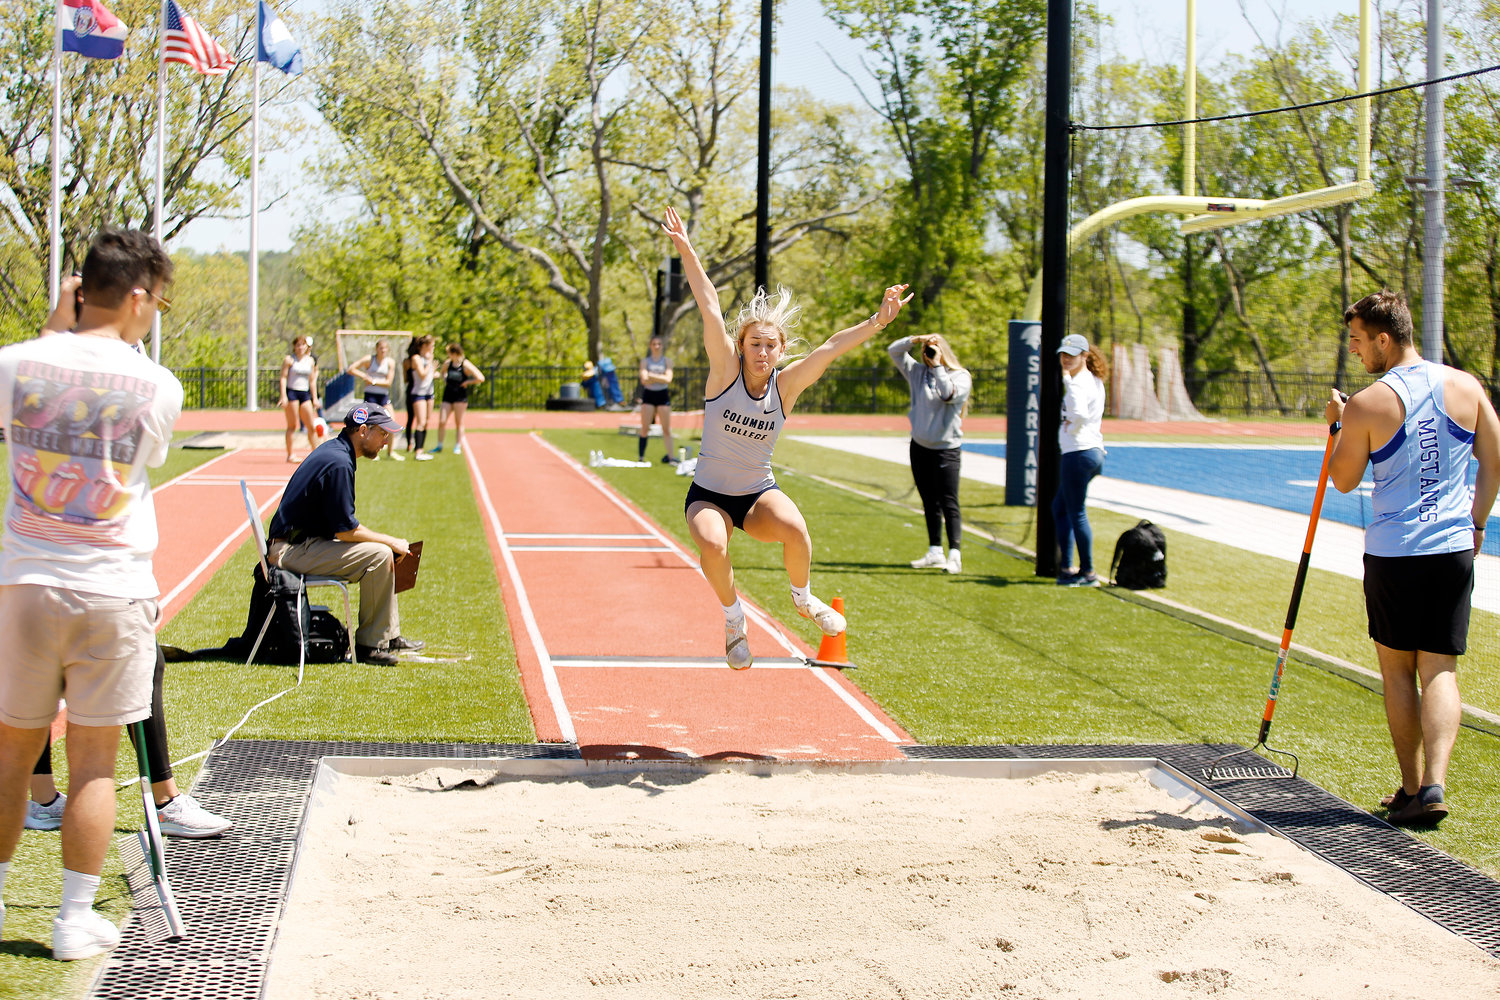 Gracie Schultz competes in the women’s long jump during the American Midwest Conference (AMC) Outdoor Track and Field Championships held back in early May on the campus of Missouri Baptist University (MBU) in St. Louis. Schultz just wrapped up her freshman season of track and field at Columbia College helping the Lady Cougars win AMC team titles in both indoor and outdoor track.